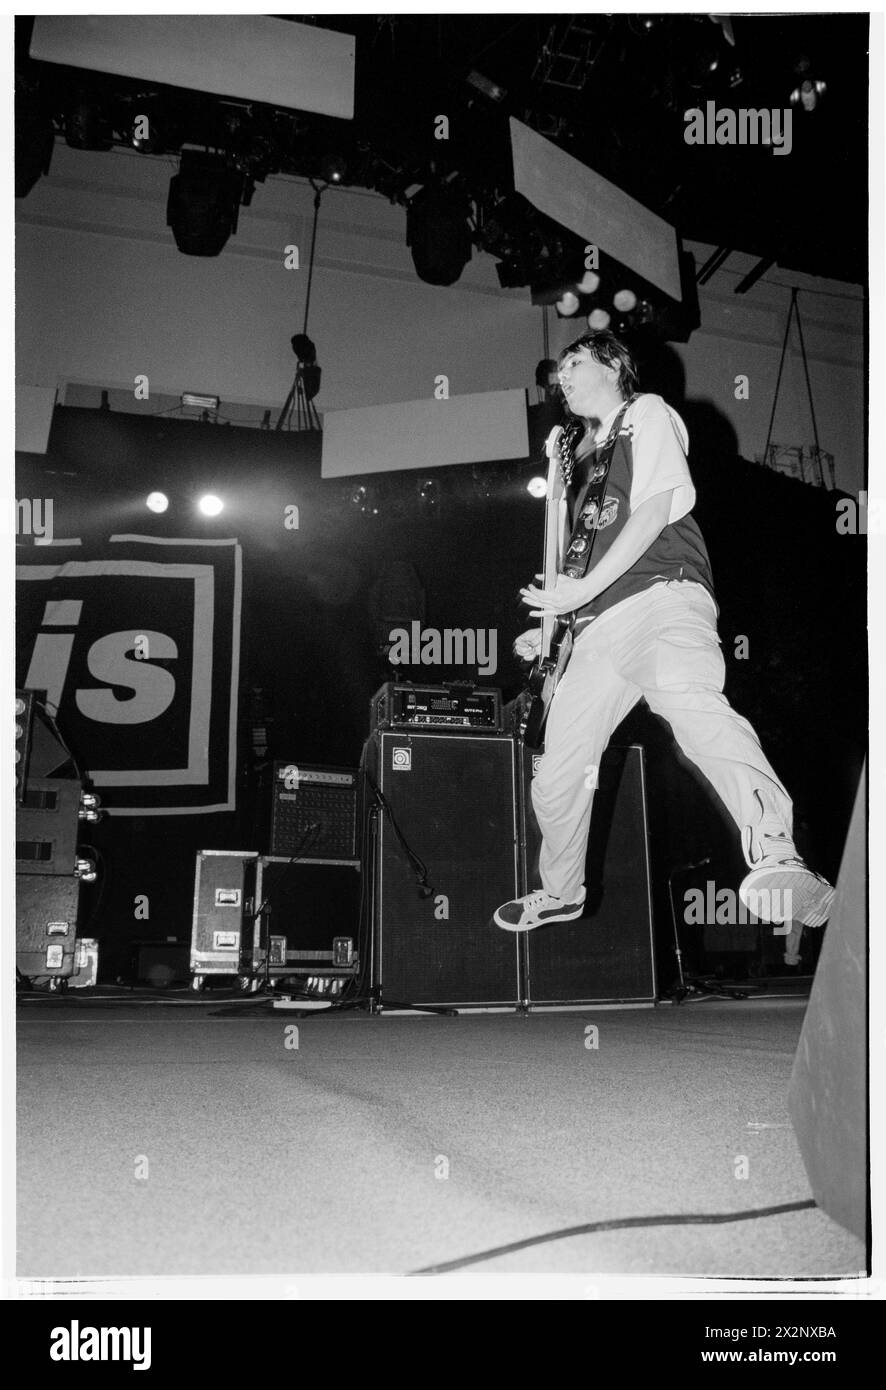 MANIC STREET PREACHERS, POST-RICHEY COMEBACK GIG, 1996: Nicky Wire of Welsh band Manic Street Preachers playing as support to Oasis at Cardiff International Arena, Wales, UK on 19 March 1996. Photo: Rob Watkins.  INFO: This concert was the Welsh band Manic Street Preachers return to touring as support to Oasis after the disappearance one year earlier of their lyricist Richey Edwards. They unveiled songs like 'Design For Life' from their iconic 'Everything Must Go' album on this tour. Stock Photo